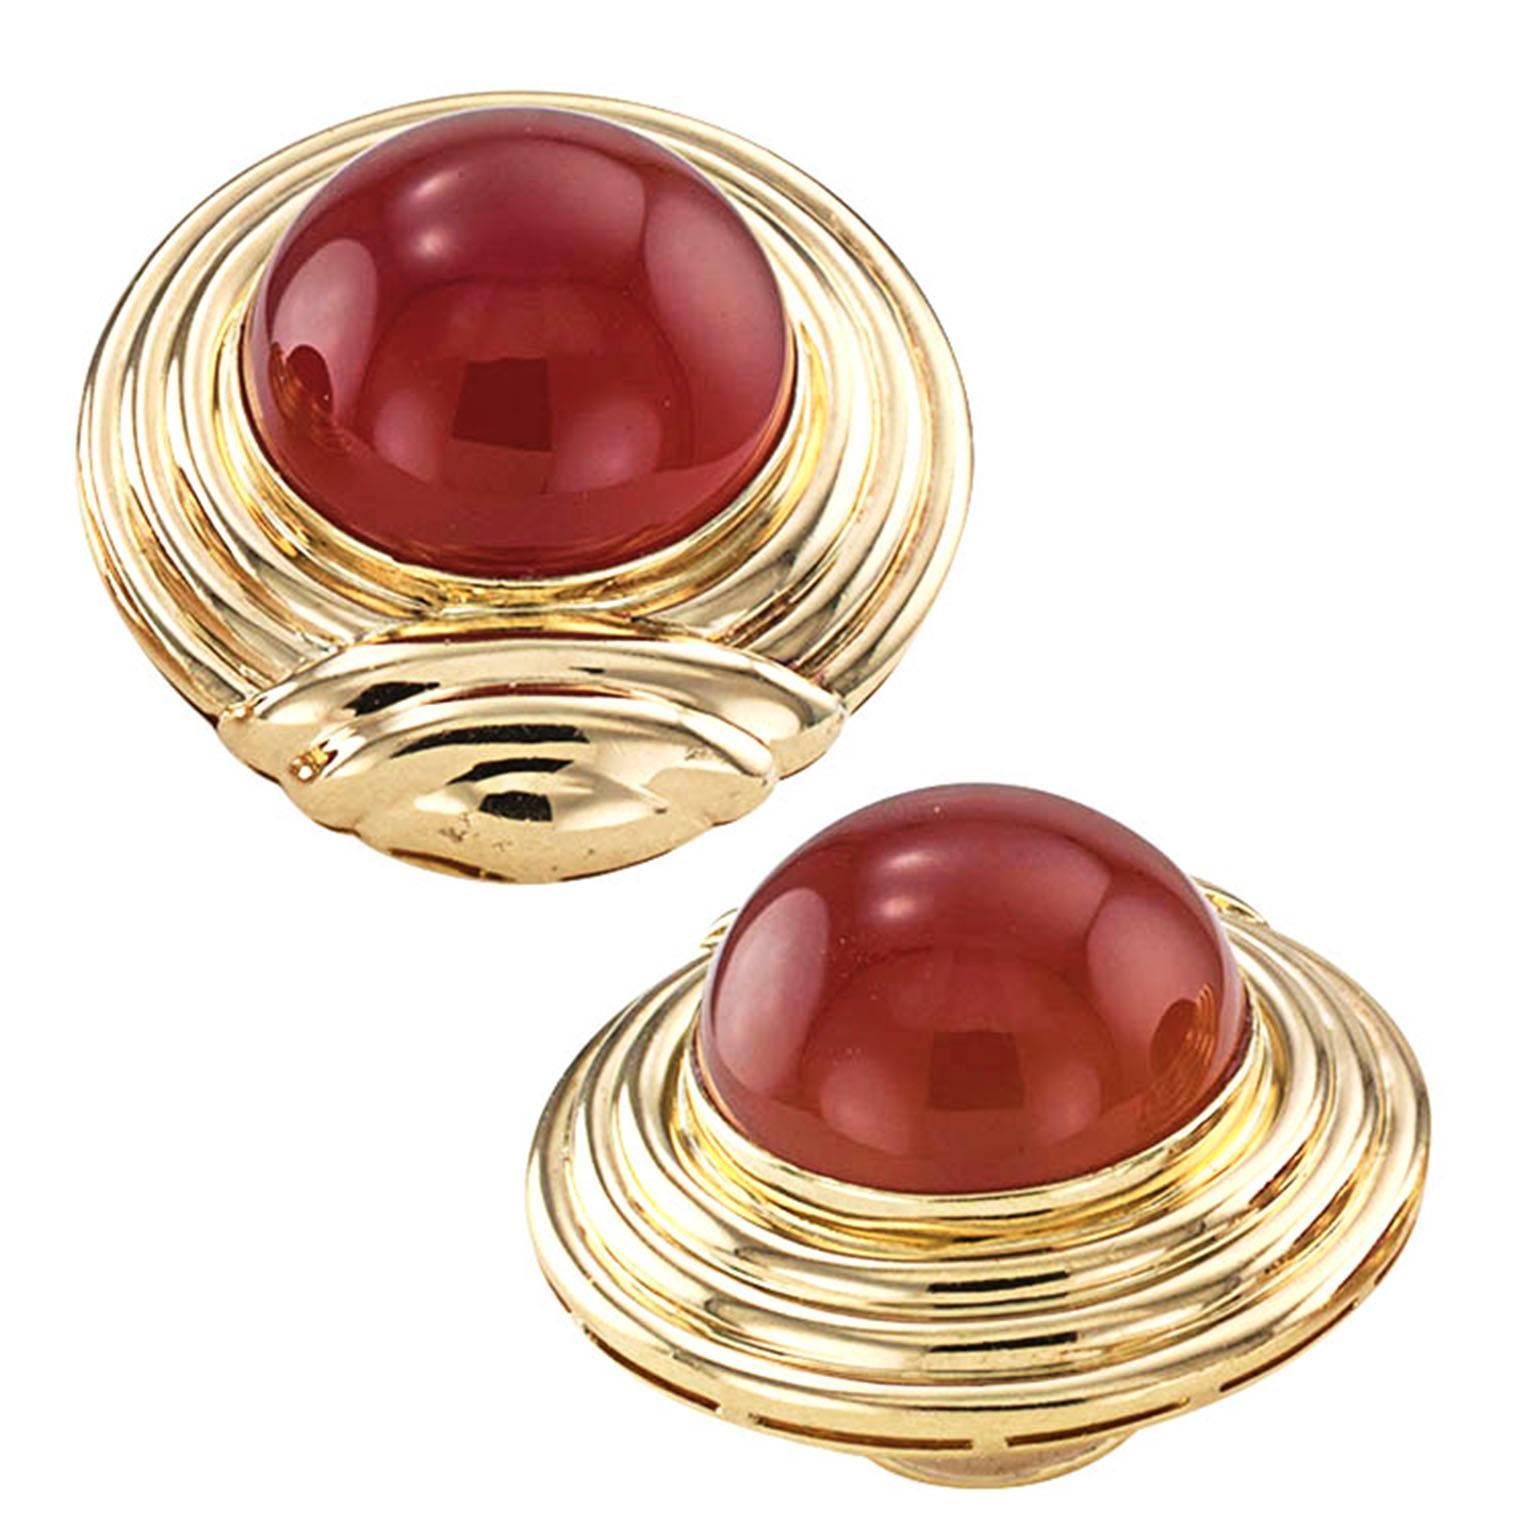 Carnelian and 18 Karat Gold Ear Clips

Tailored statement-maker 18 karat yellow gold earrings, showcasing a pair of outstanding carnelian cabochons that glow like honey in a jar, framed by stepped fluid gold lines that catch and reflect light in a